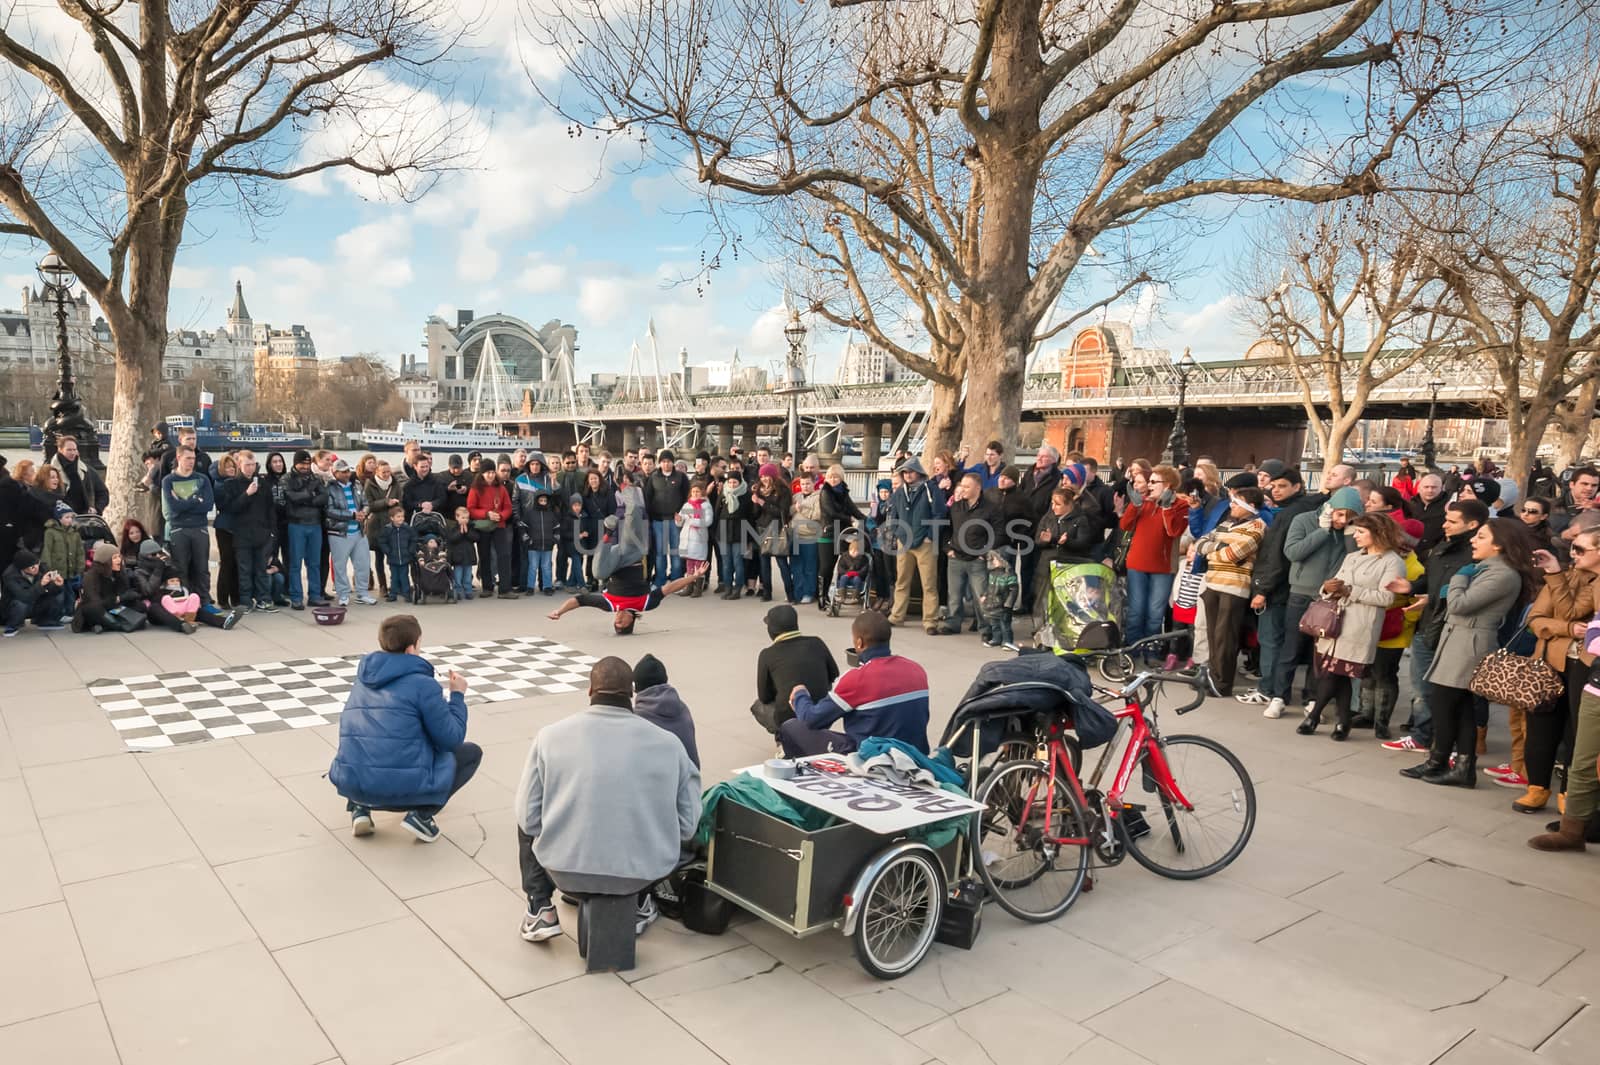 London, UK - January 27, 2013: A large crowd watching street dance performers on a cold afternoon by the South Bank of River Thames in London, UK